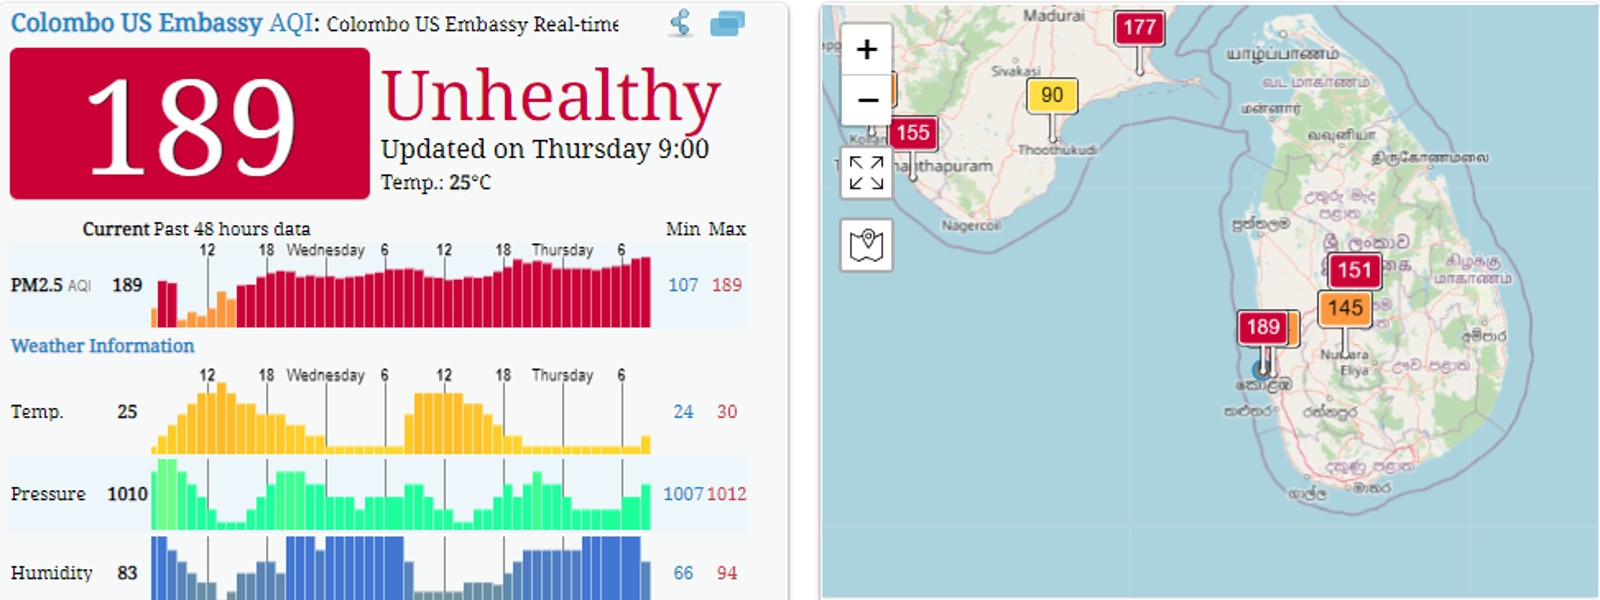 Colombo air quality drops to unhealthy level